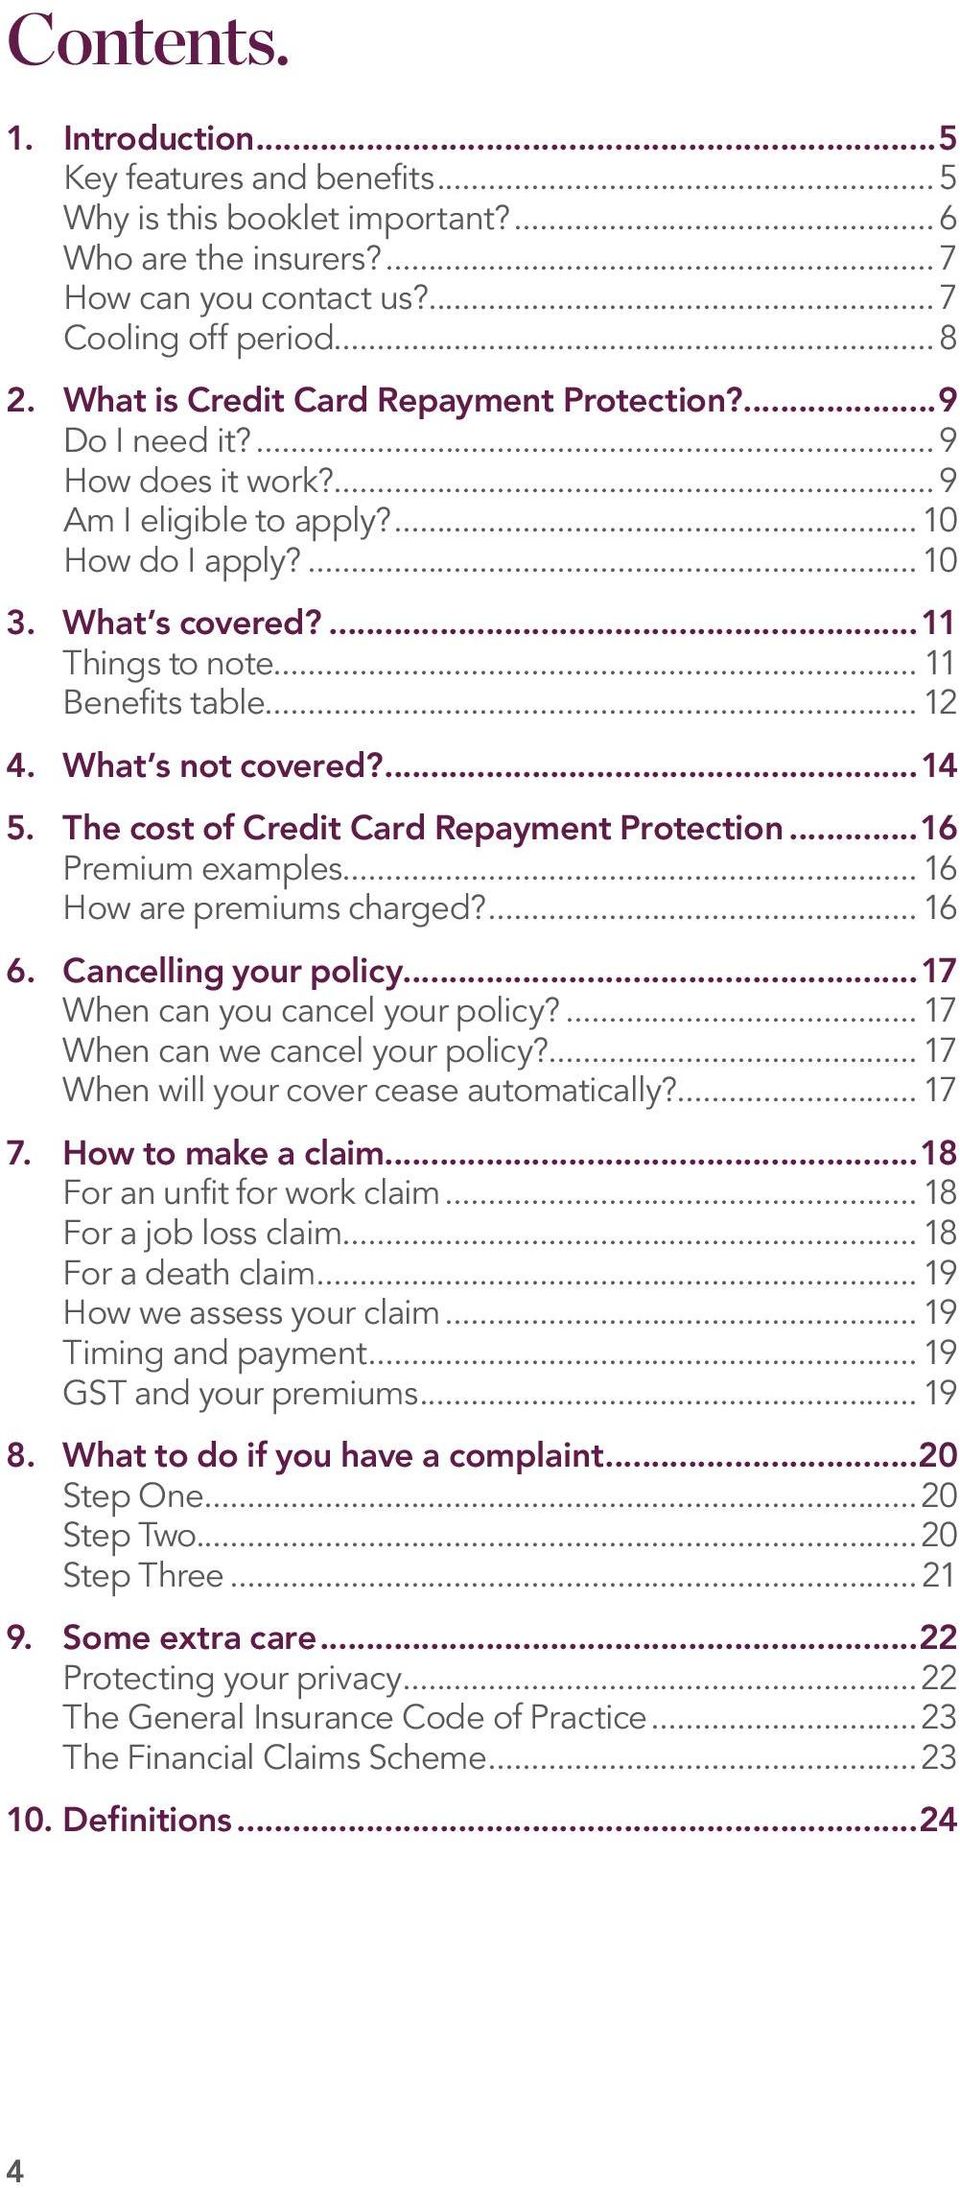 .. 12 4. What s not covered?...14 5. The cost of Credit Card Repayment Protection...16 Premium examples... 16 How are premiums charged?... 16 6. Cancelling your policy.